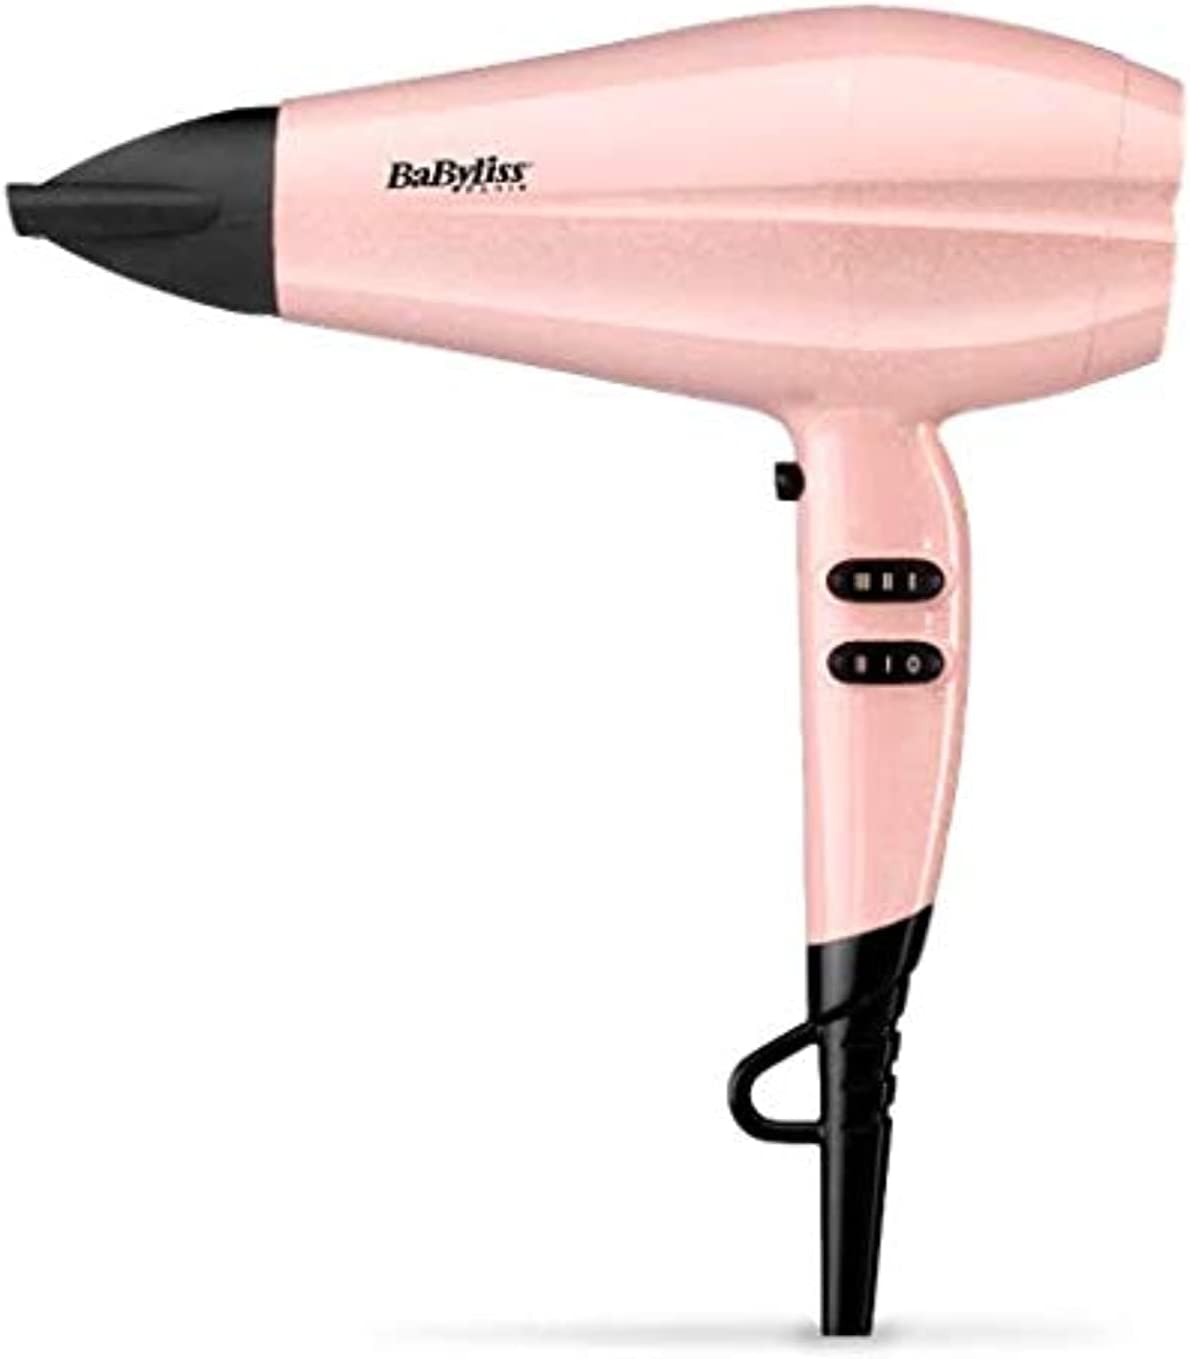 Babyliss Hair Dryer Compact 2200W, Rose Blush Advanced Ionic Frizz Control 3 Heat 2 Speed Settings With Cool Shot Light  - E11 Store